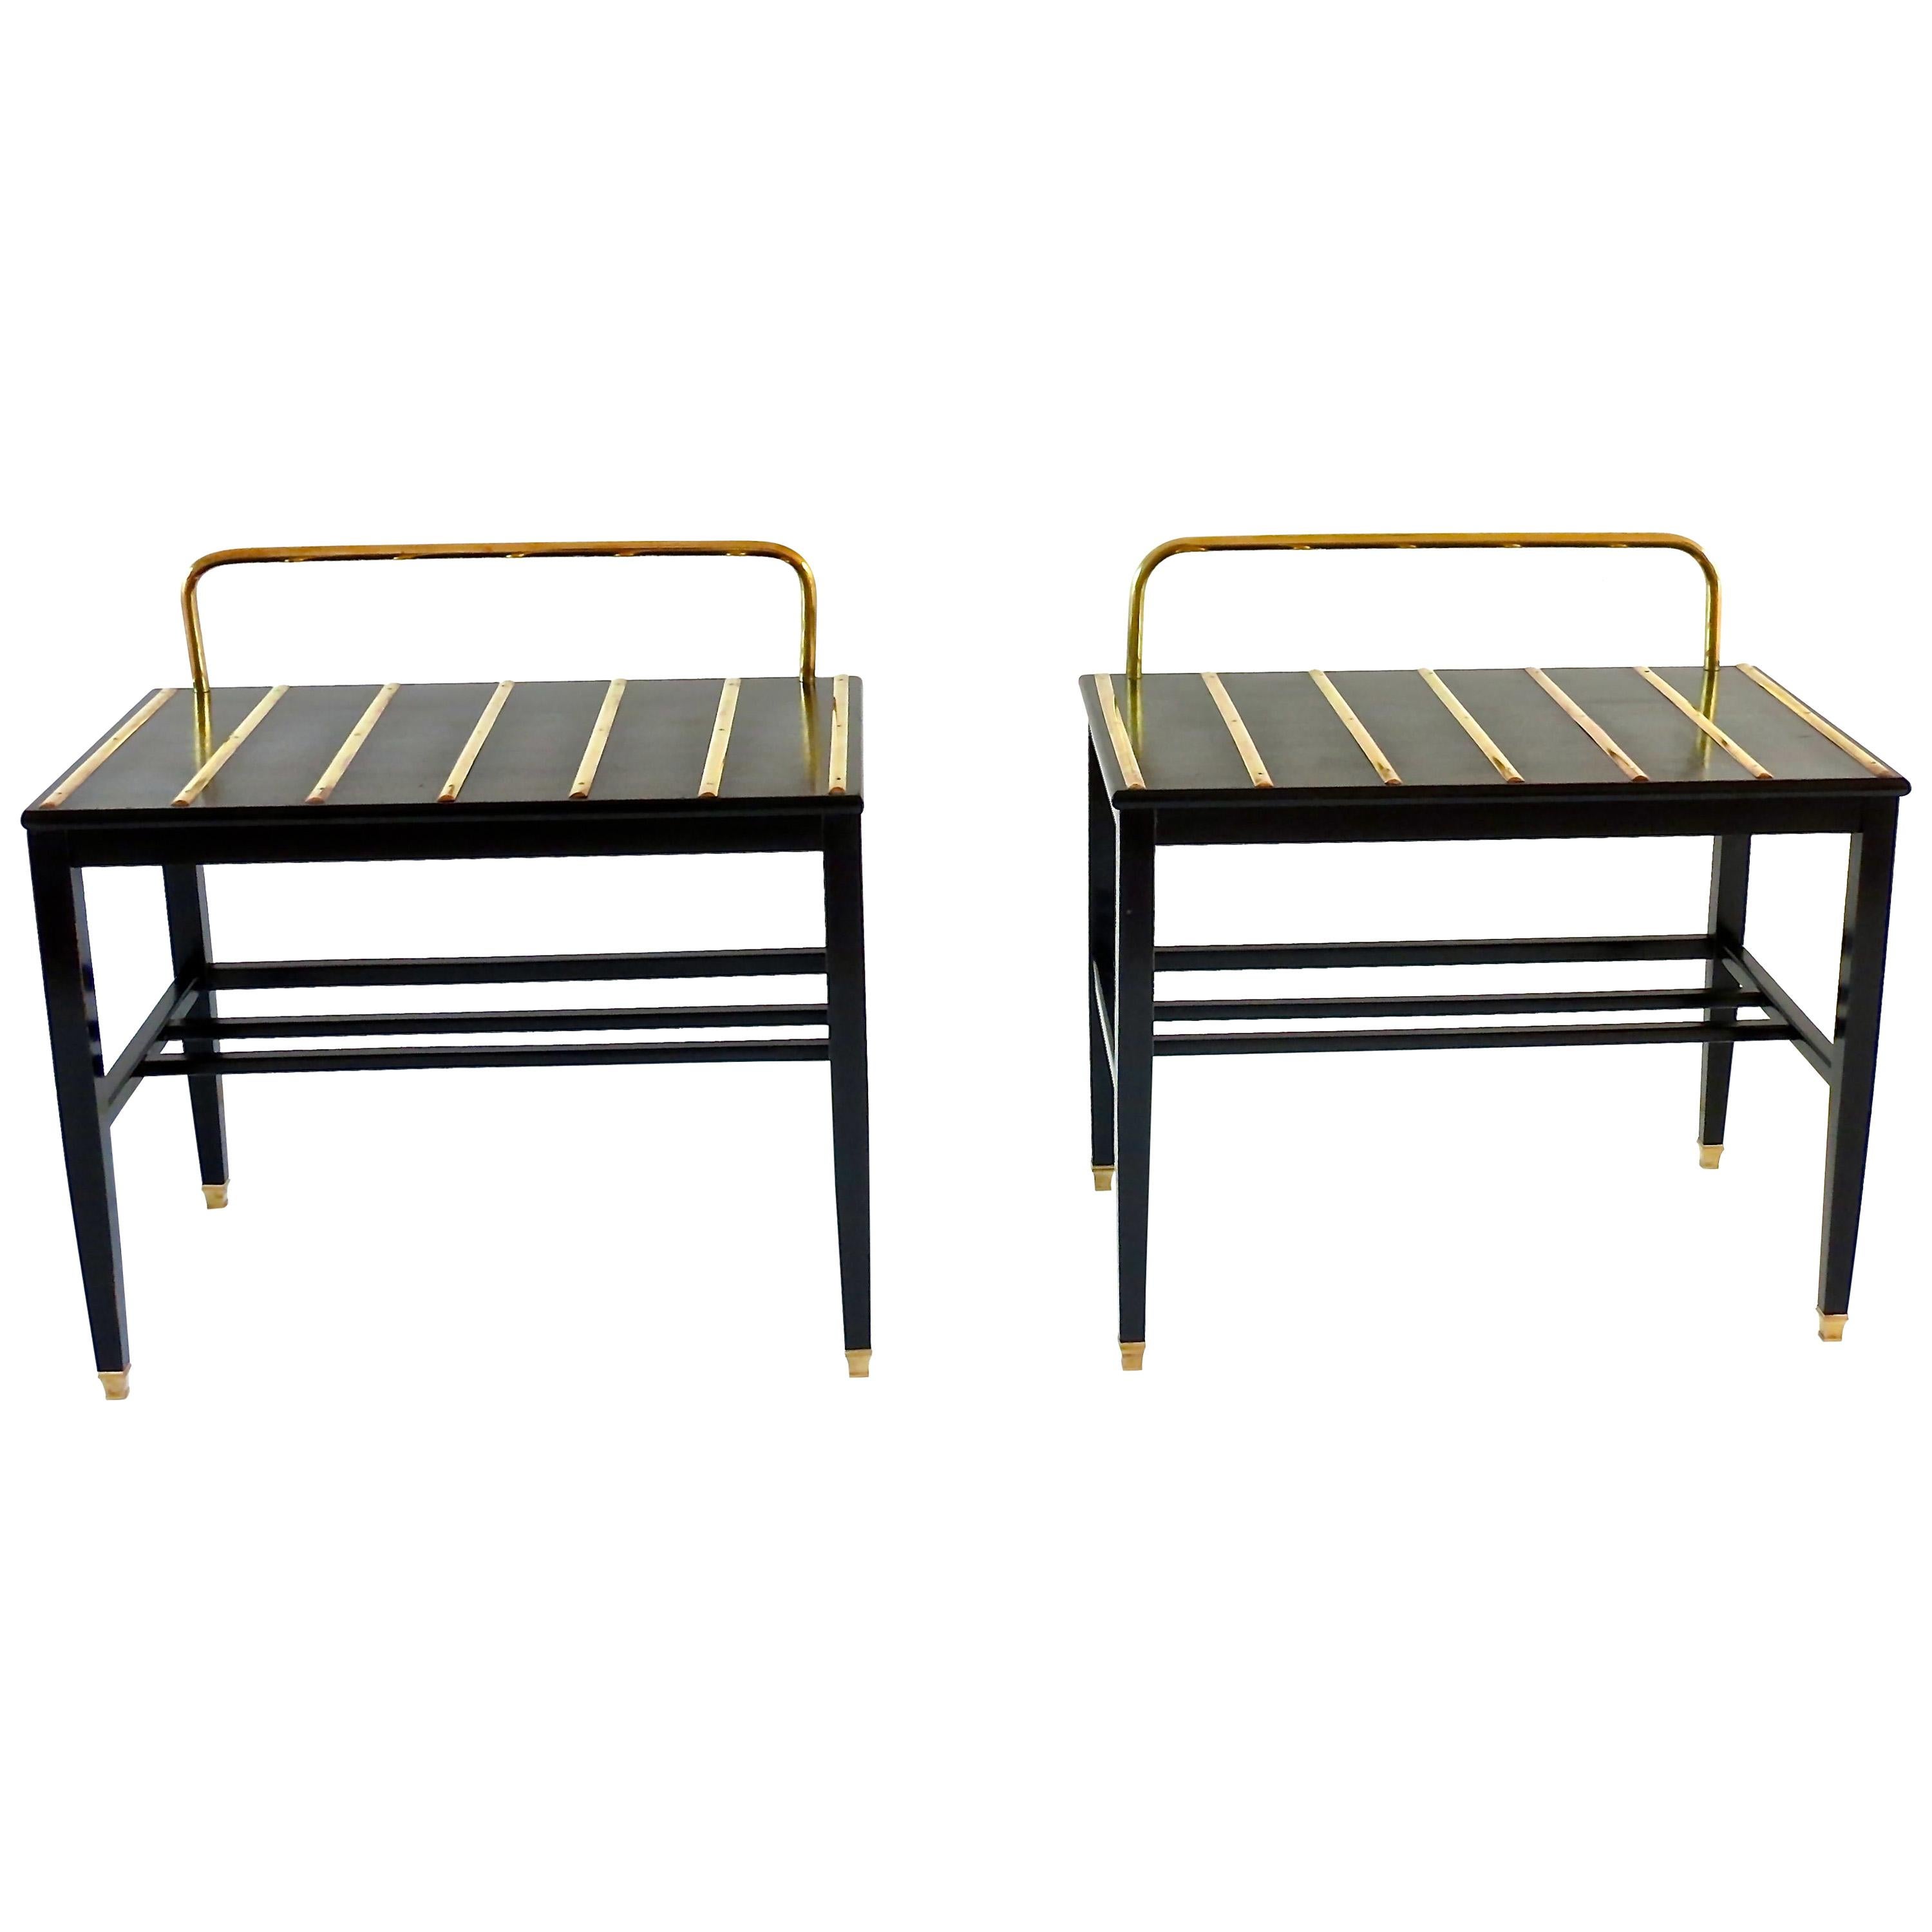 Pair of Gio Ponti Black Walnut Lacquered Side Tables from Hotel Royal Naples